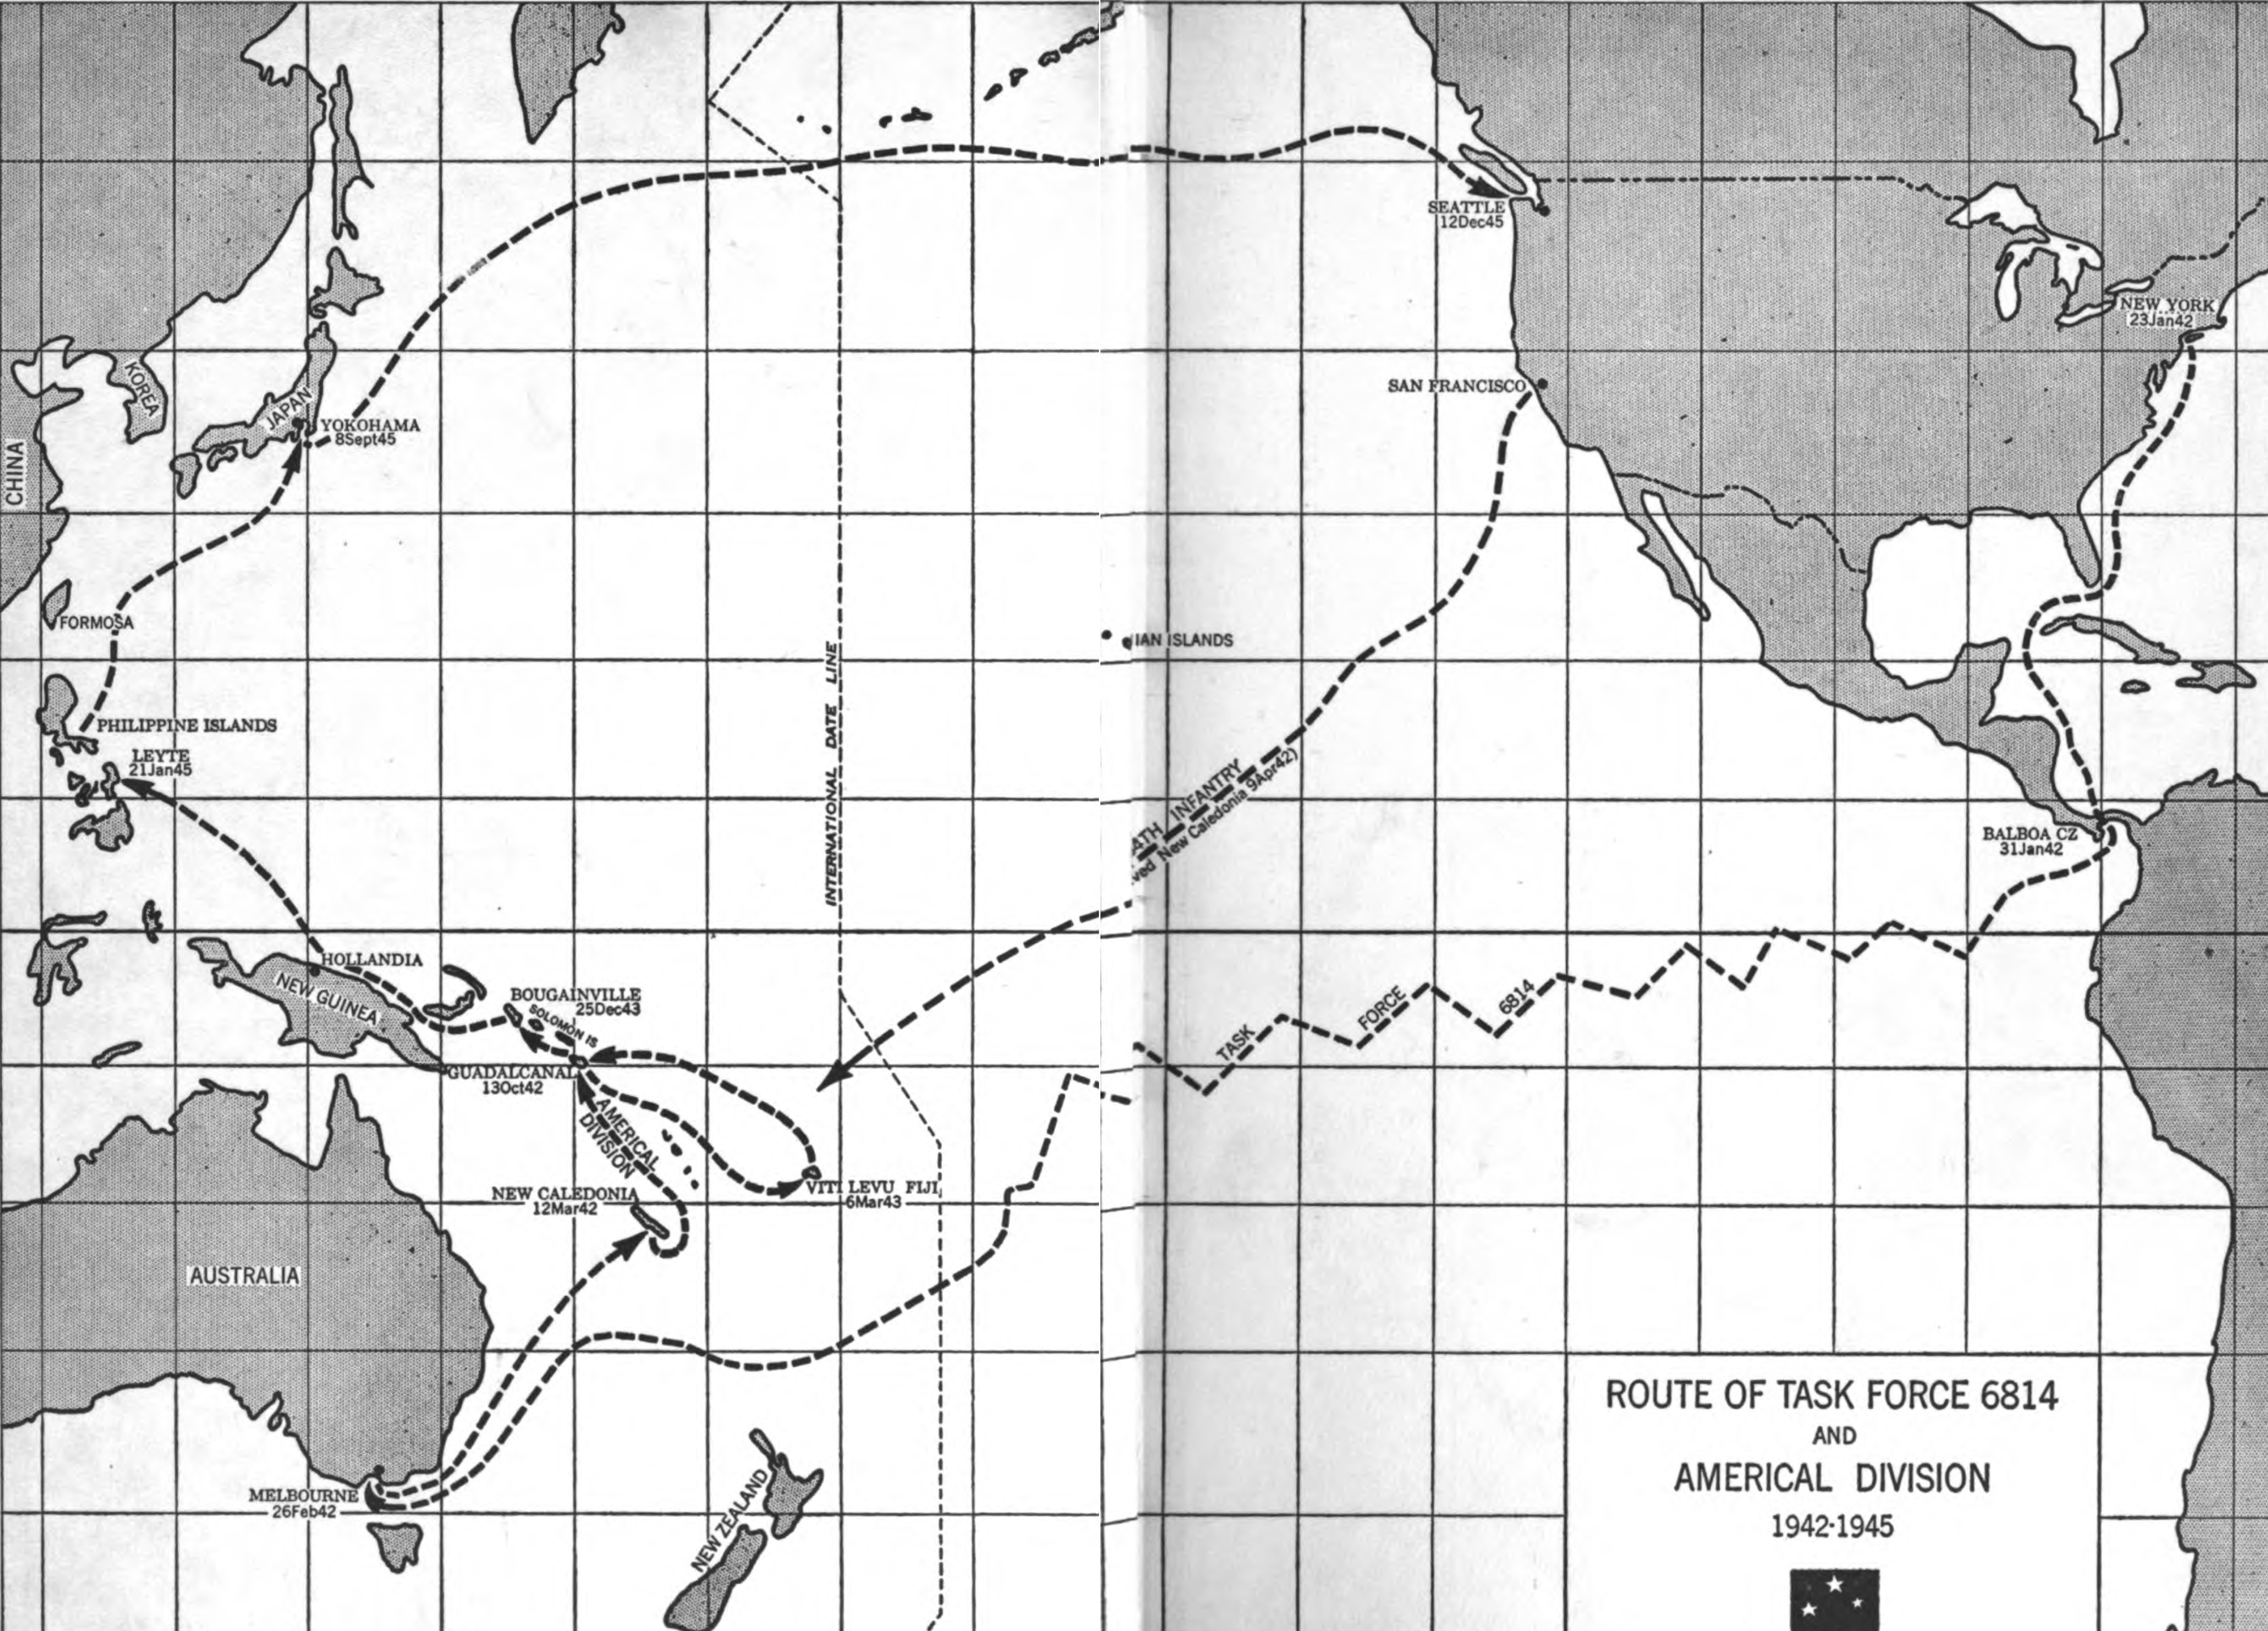 Map of the Pacific showing the route traveled by the Americal Division, 1942-1945